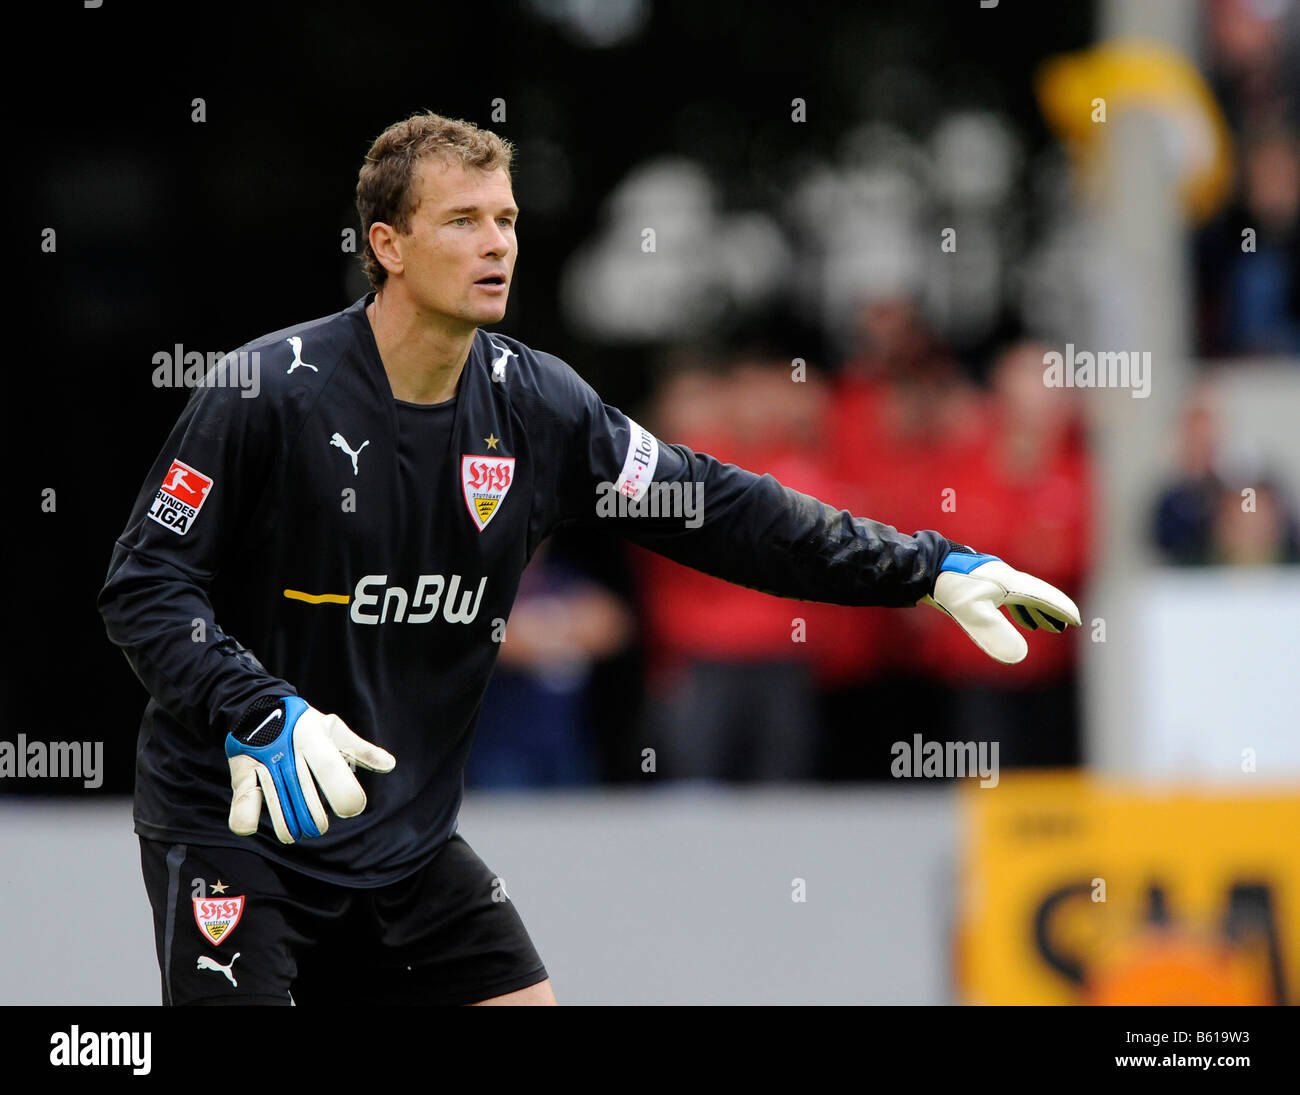 Goalkeeper Jens LEHMANN, VfB Stuttgart, gesticulating and directing the defence Stock Photo